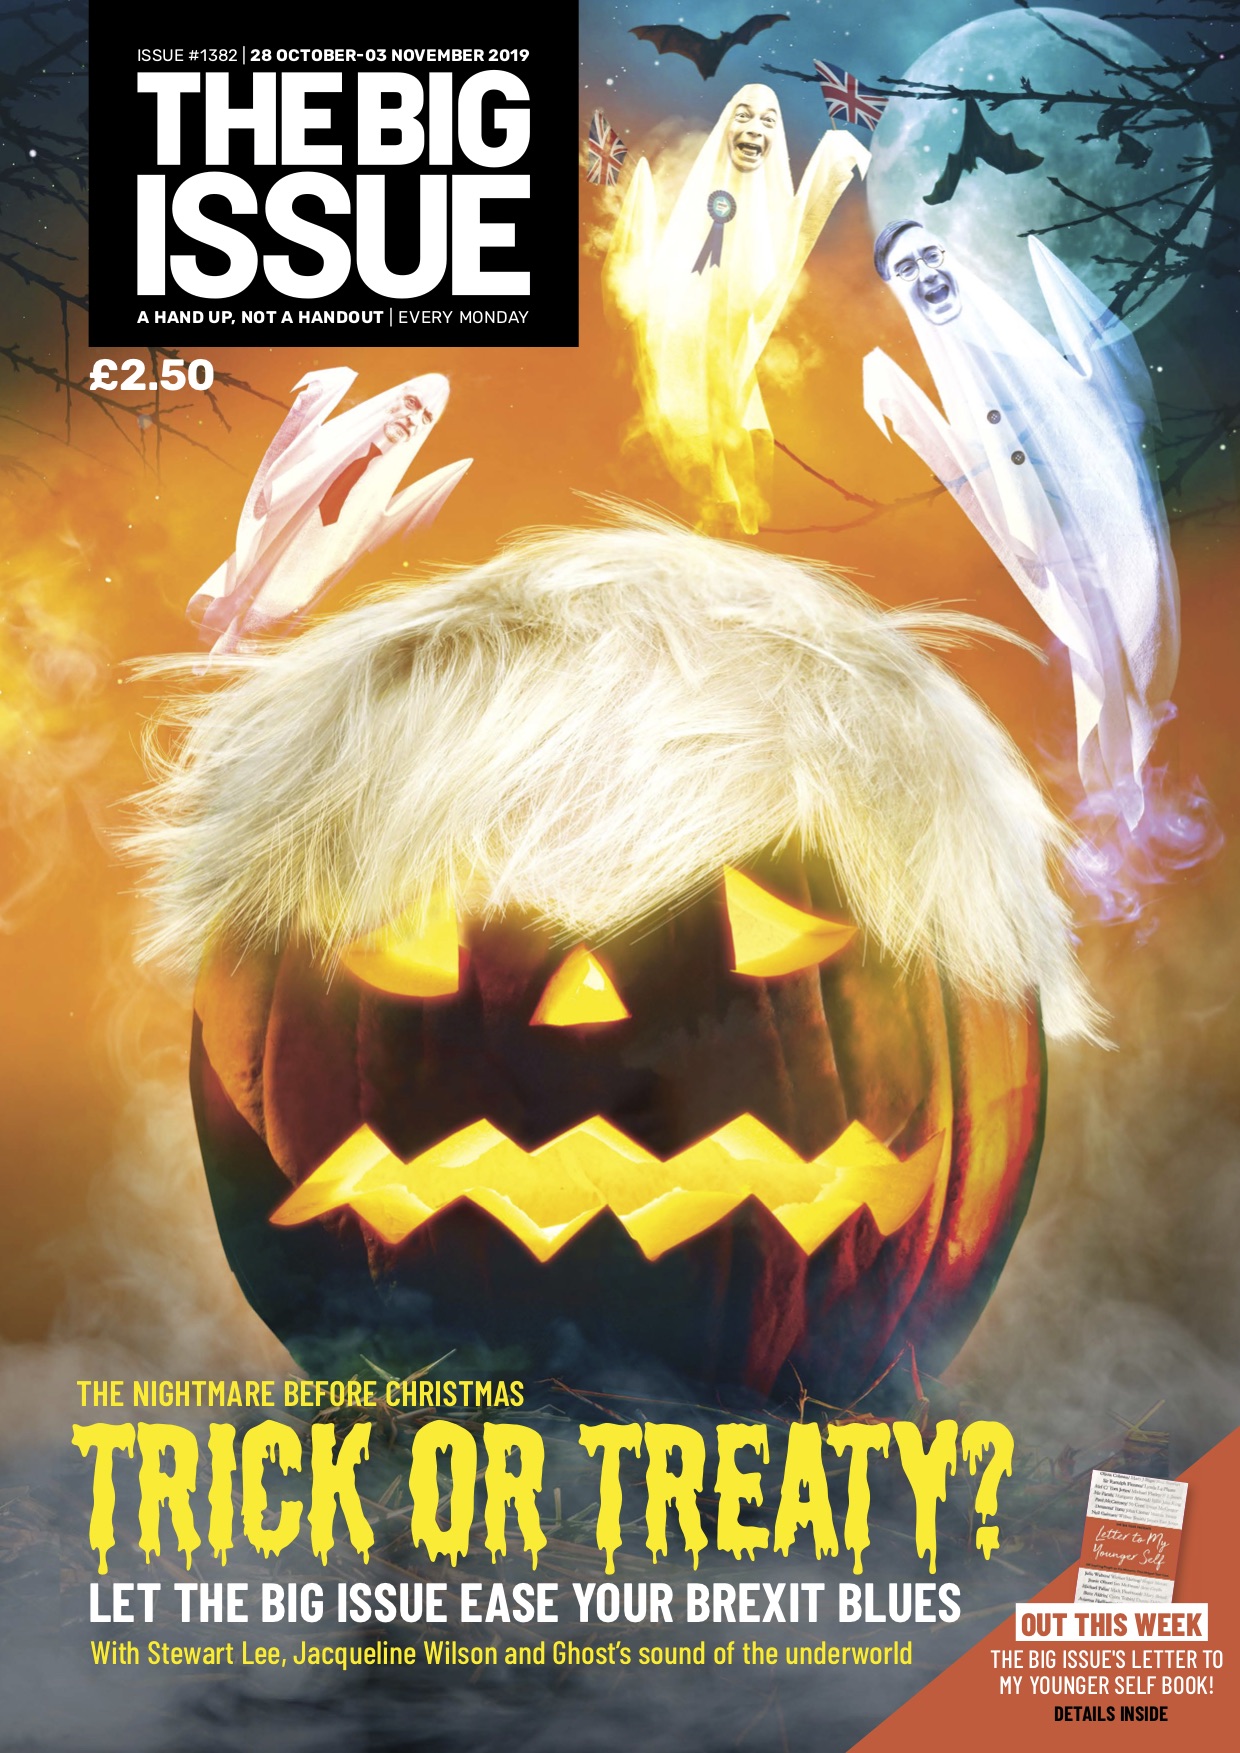 Boo! It's this week's Big Issue!